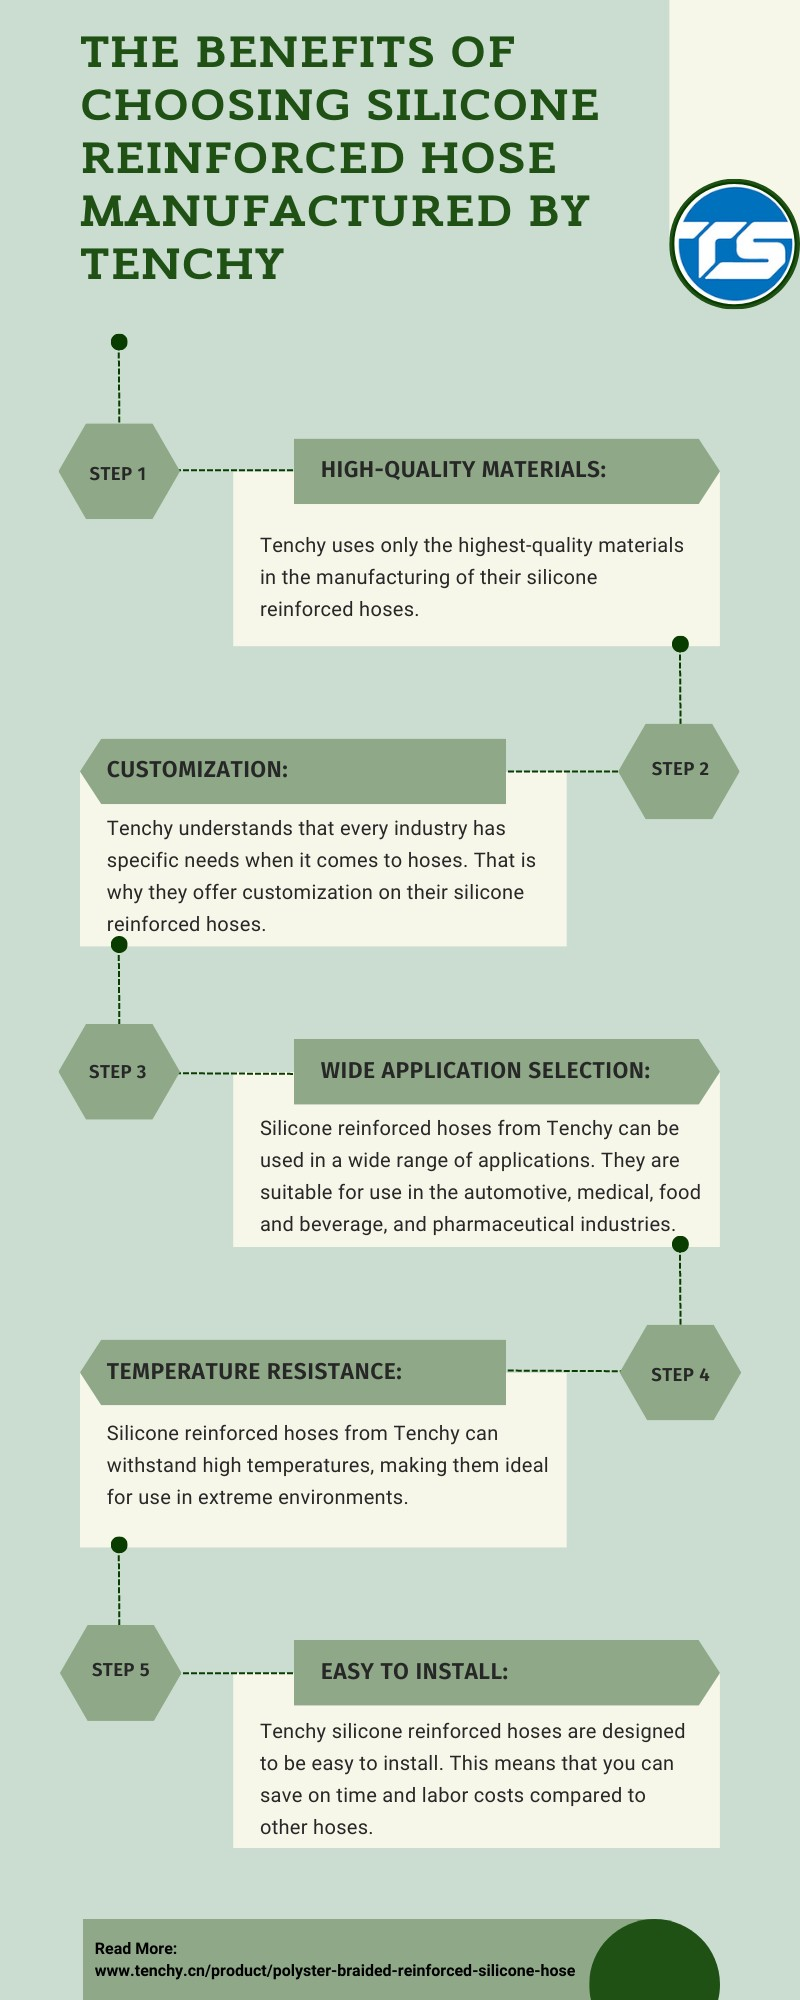 The Benefits of Choosing Silicone Reinforced Hose Manufactured by Tenchy [Infographic]